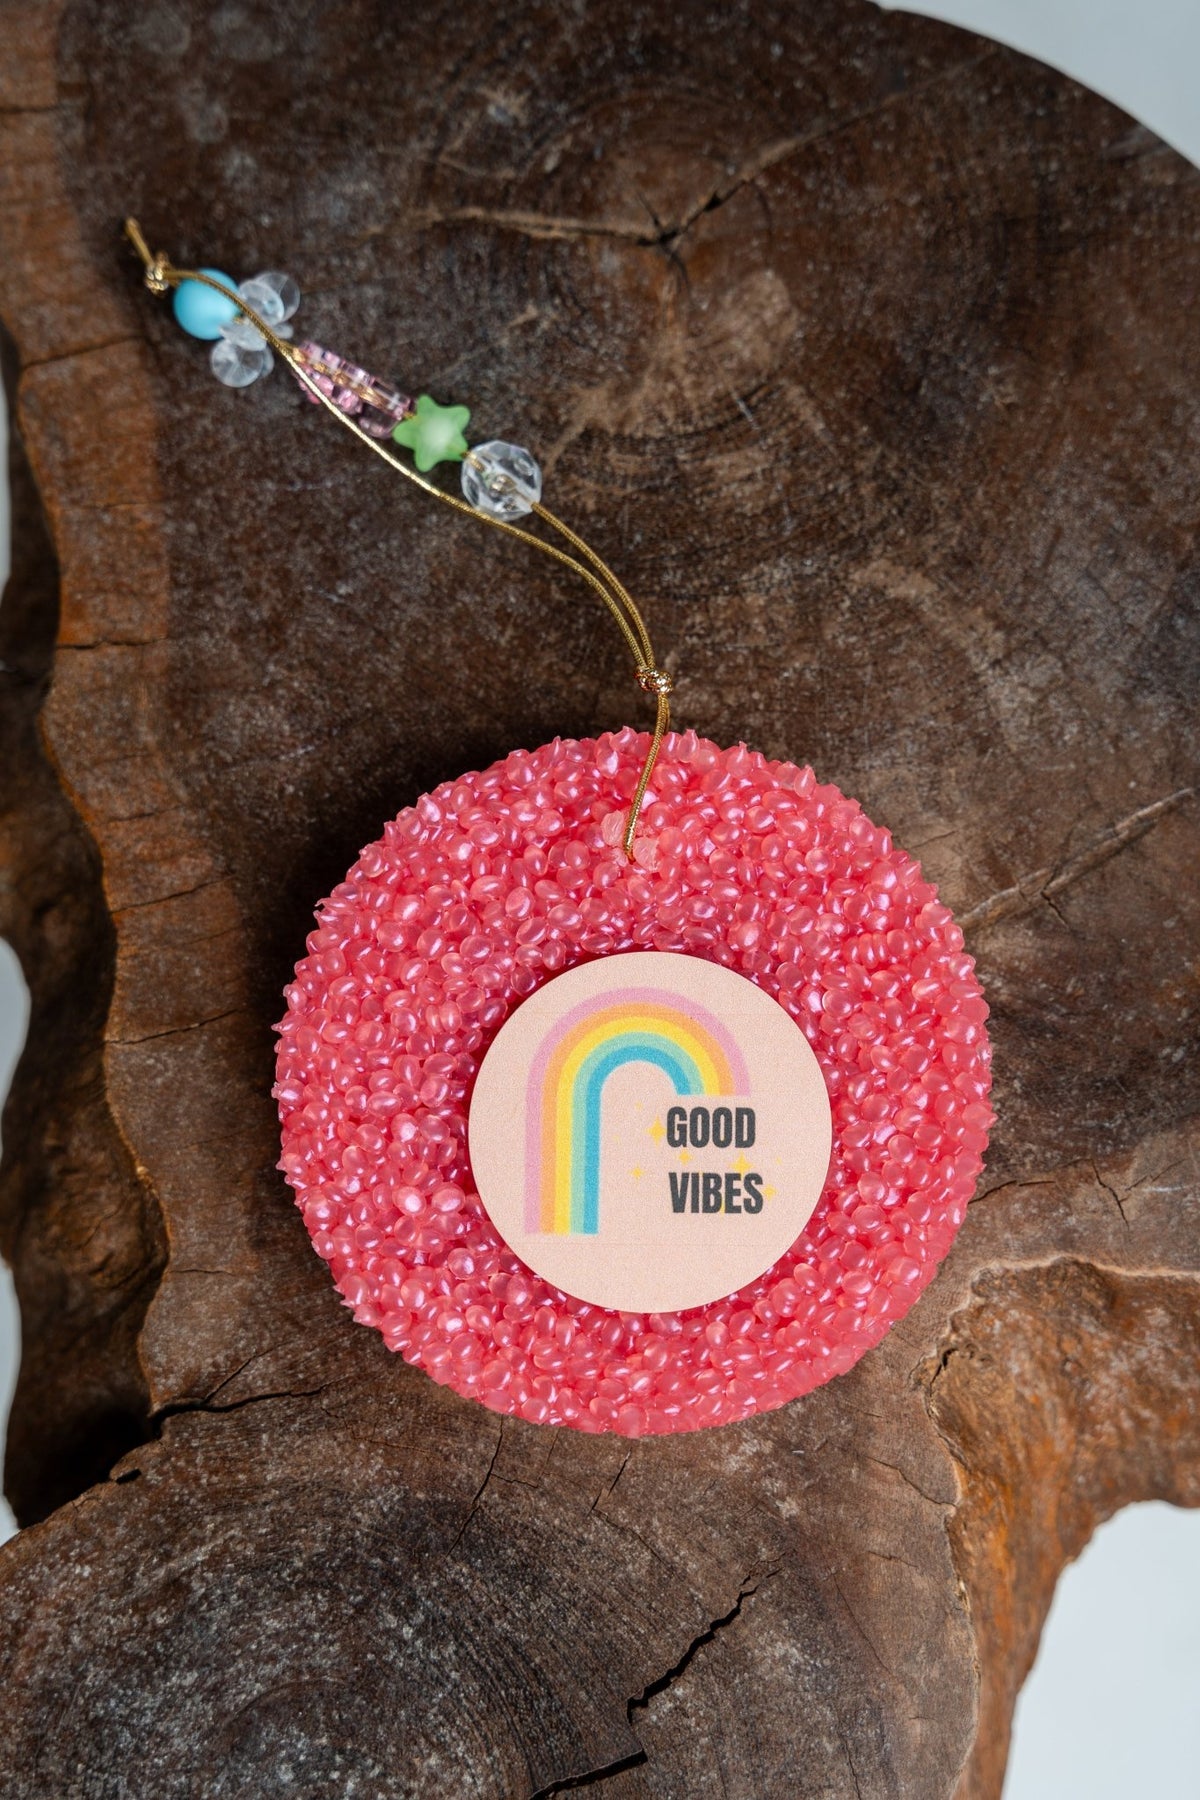 Good vibes rainbow beaded pink freshie volcano - Trendy Candles and Scents at Lush Fashion Lounge Boutique in Oklahoma City